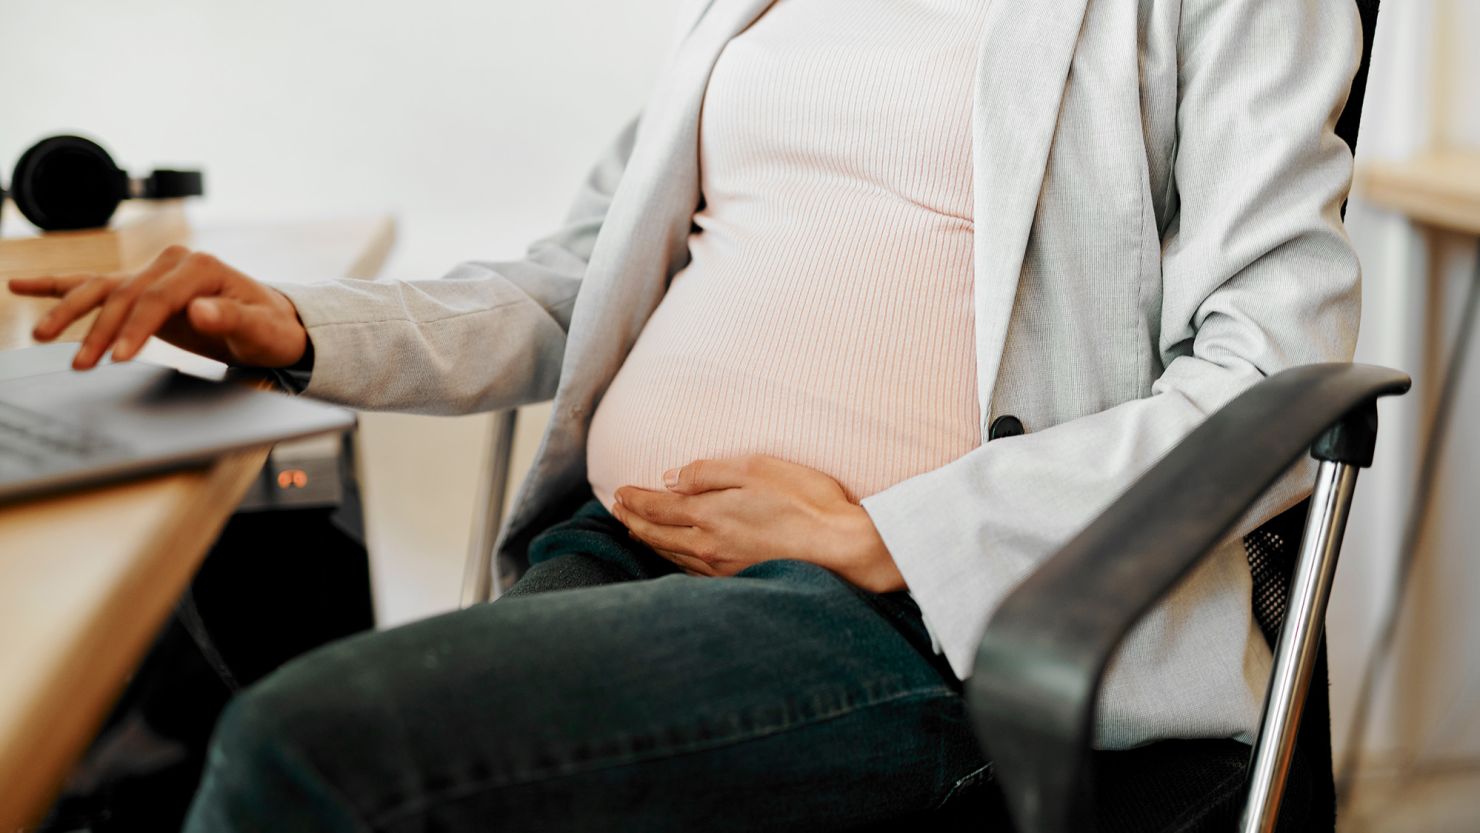 A new final rule from the Equal Employment Opportunity Commission clarifies the provisions of the Pregnant Workers Fairness Act.